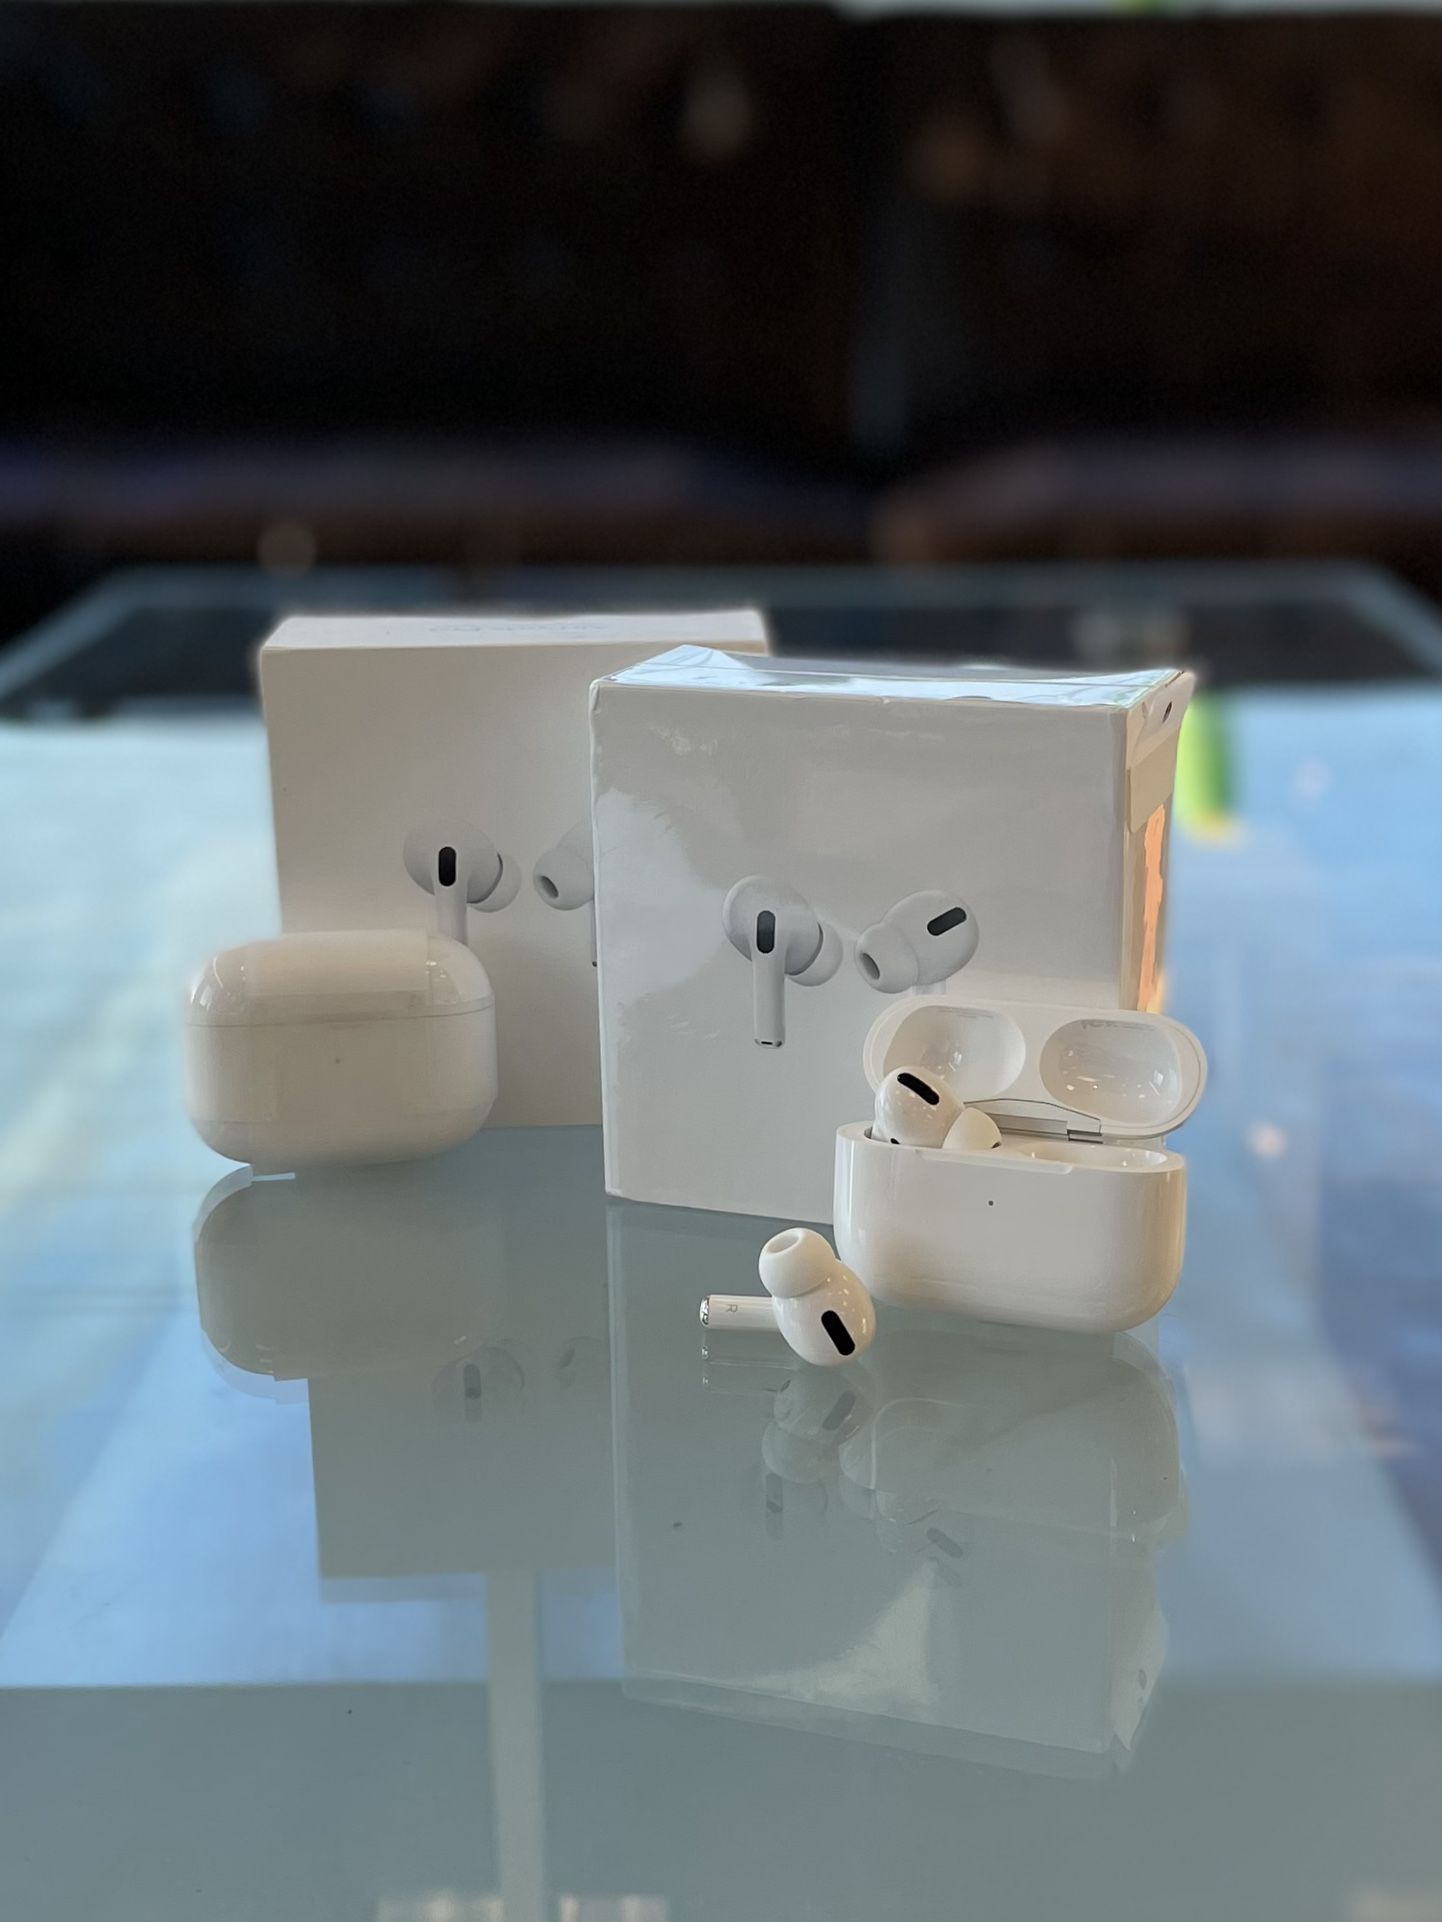 Apple AirPods Pro (will take payments ->)